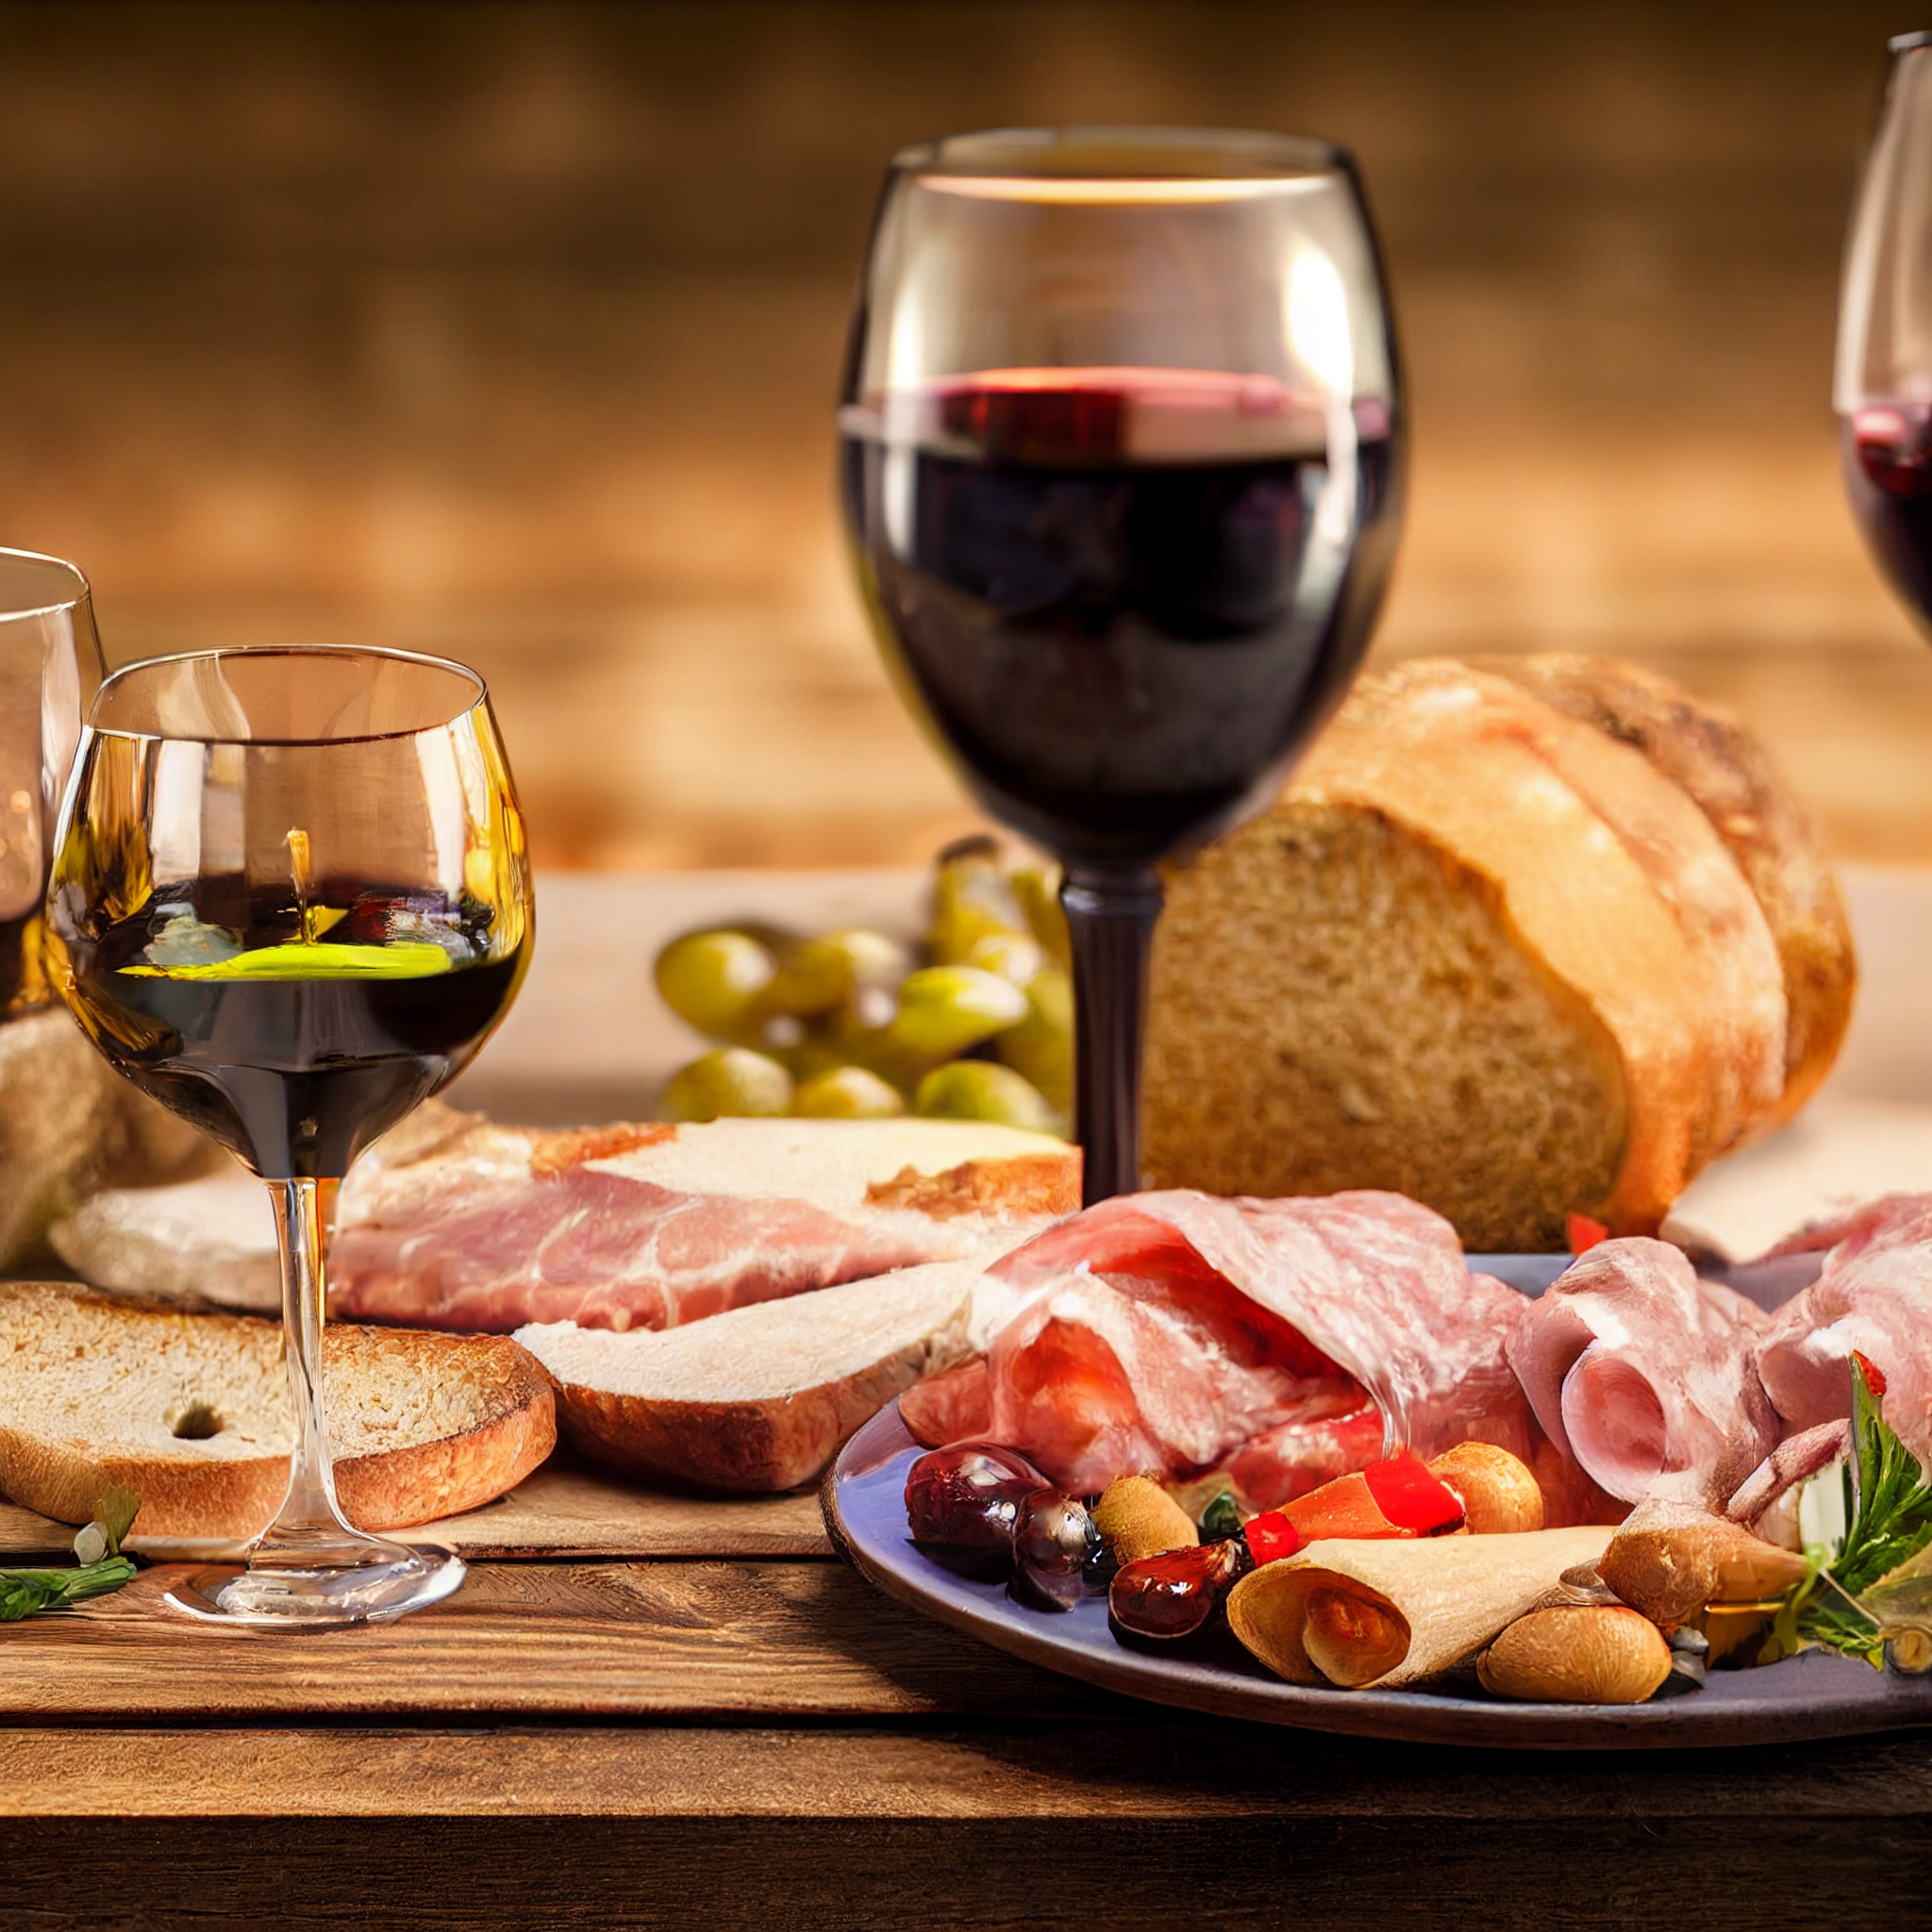 Spanish tapas on wooden table, wine bottle , wine glass with red wine, olive oil, meats, bread, high definition, insane definition, photo realistic,